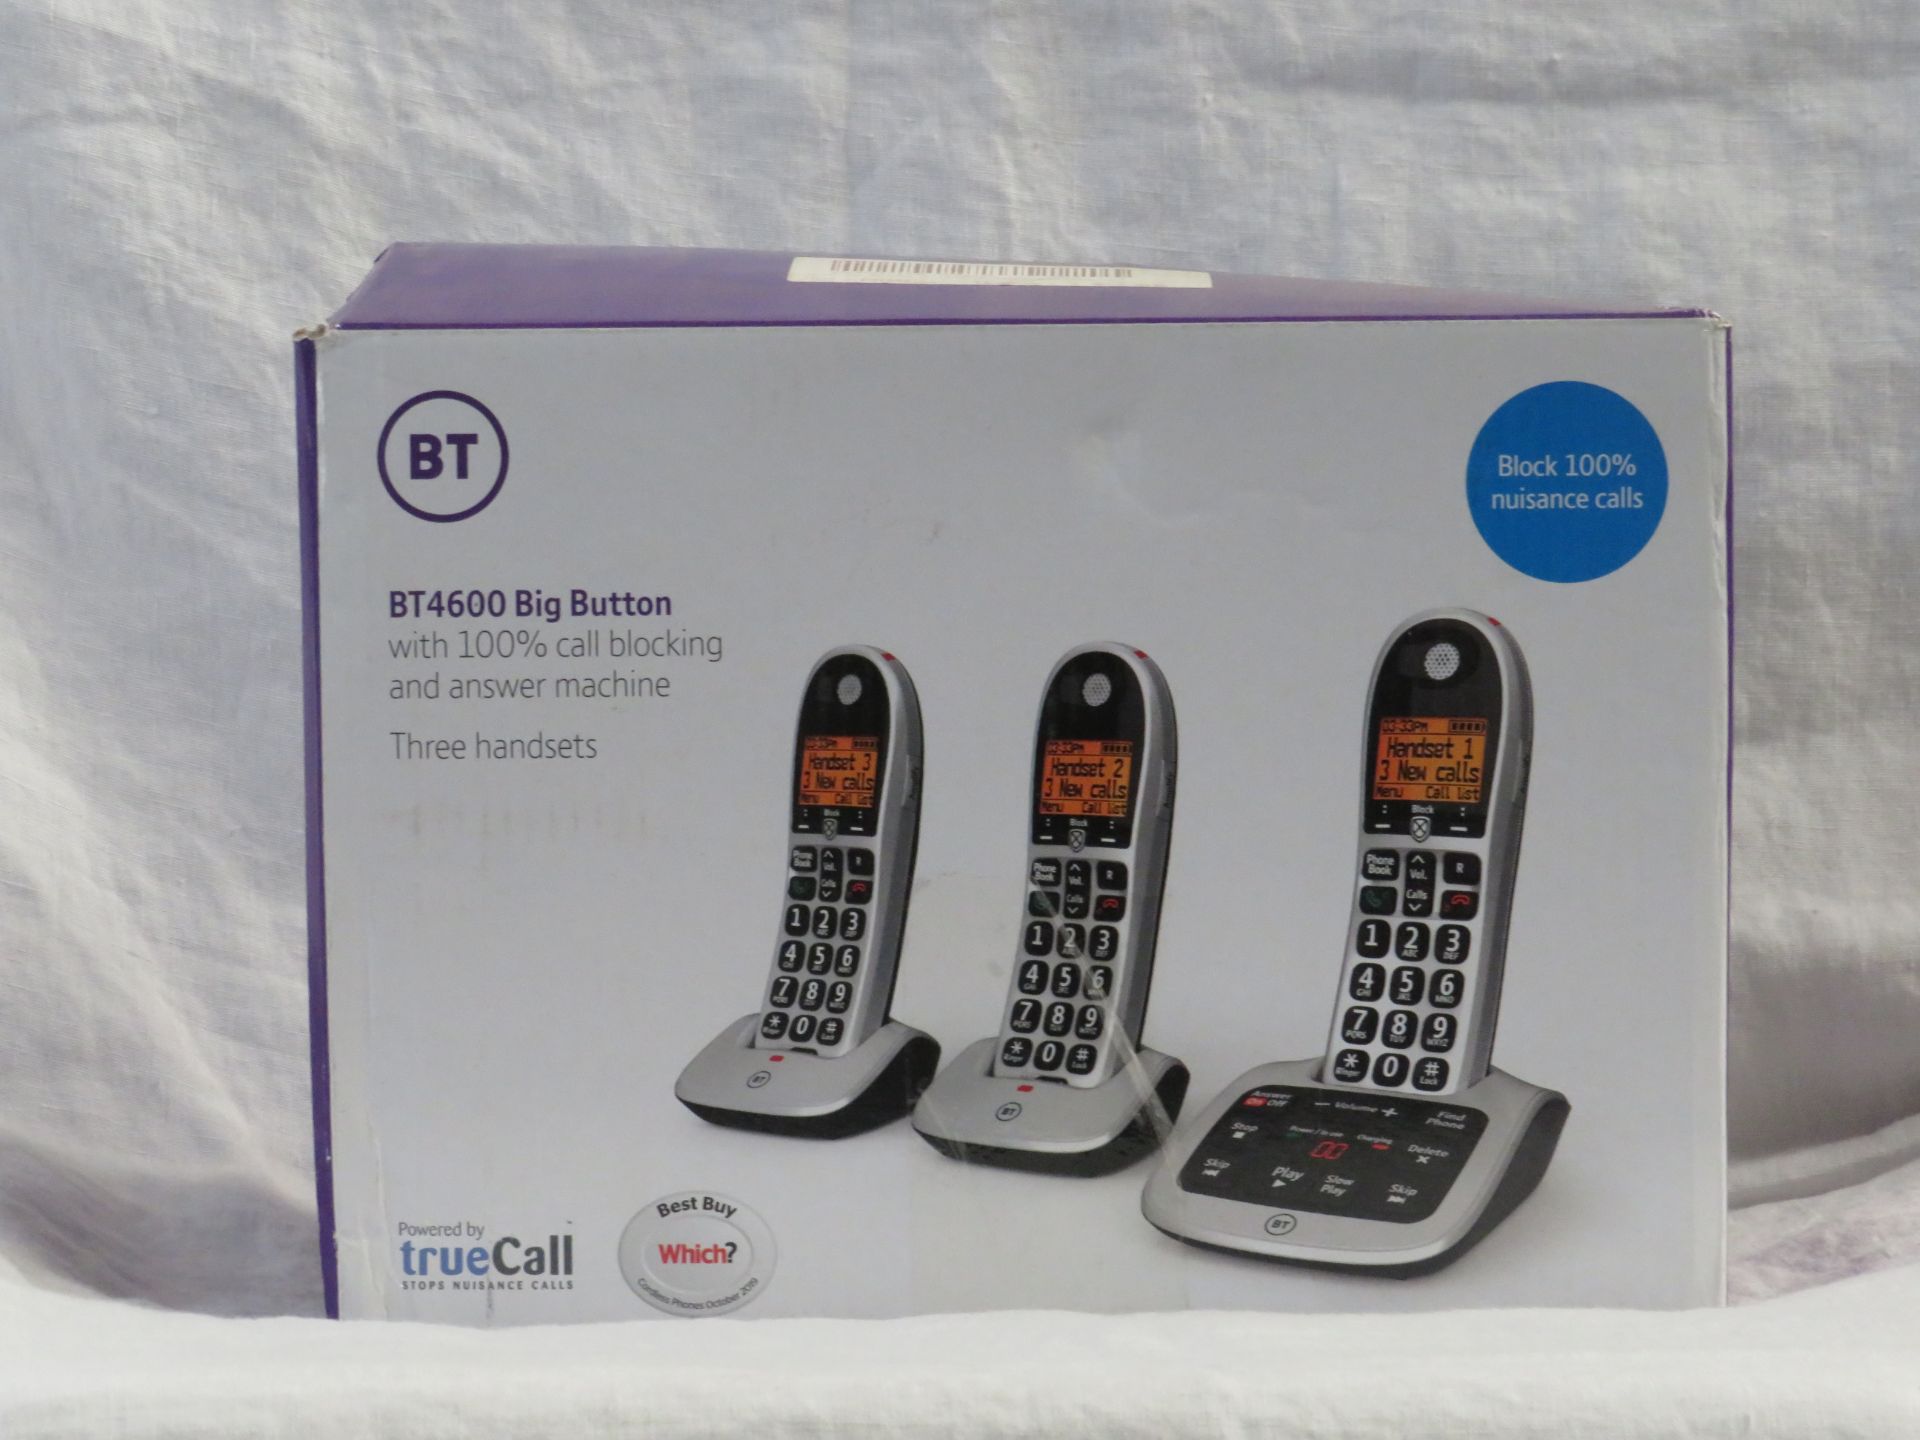 BT 4600 Duo set of Big Button Digital telephones with nuisance call blocker built in, looks unused